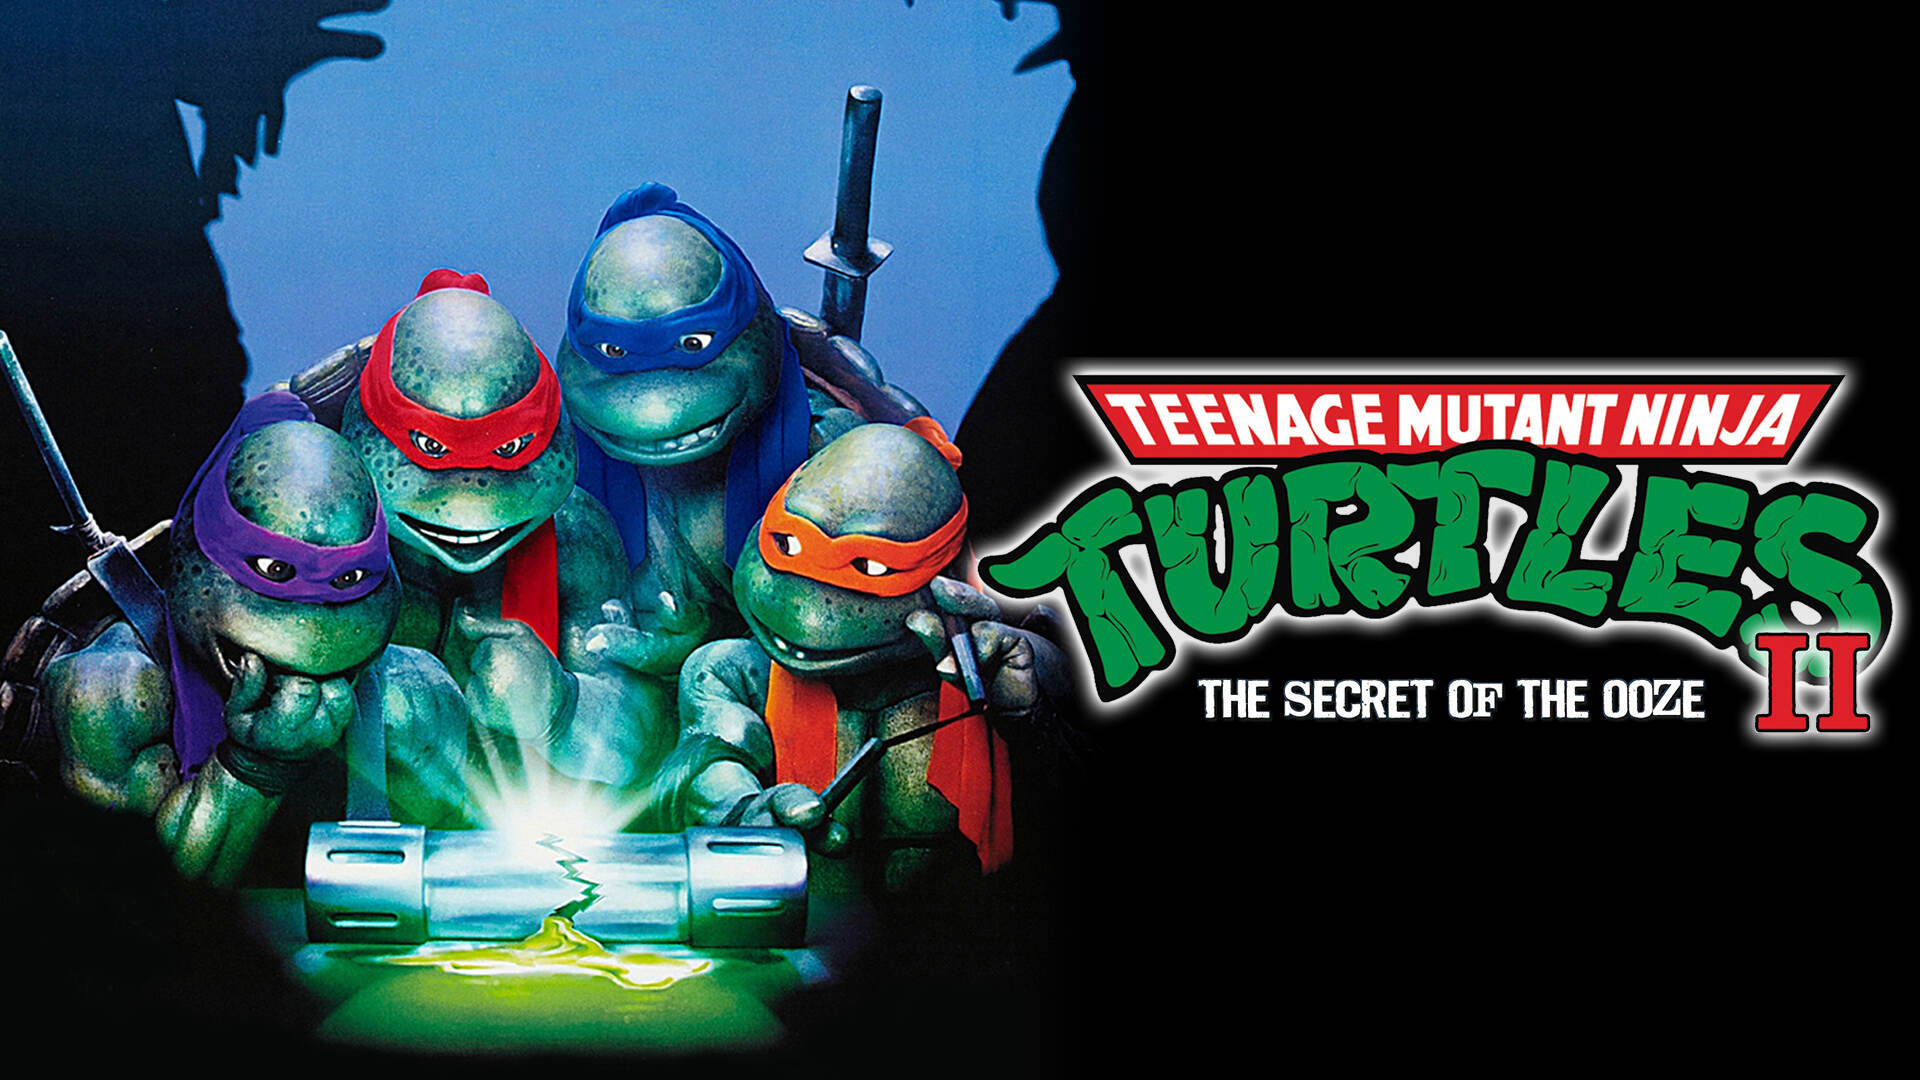 45-facts-about-the-movie-teenage-mutant-ninja-turtles-ii-the-secret-of-the-ooze